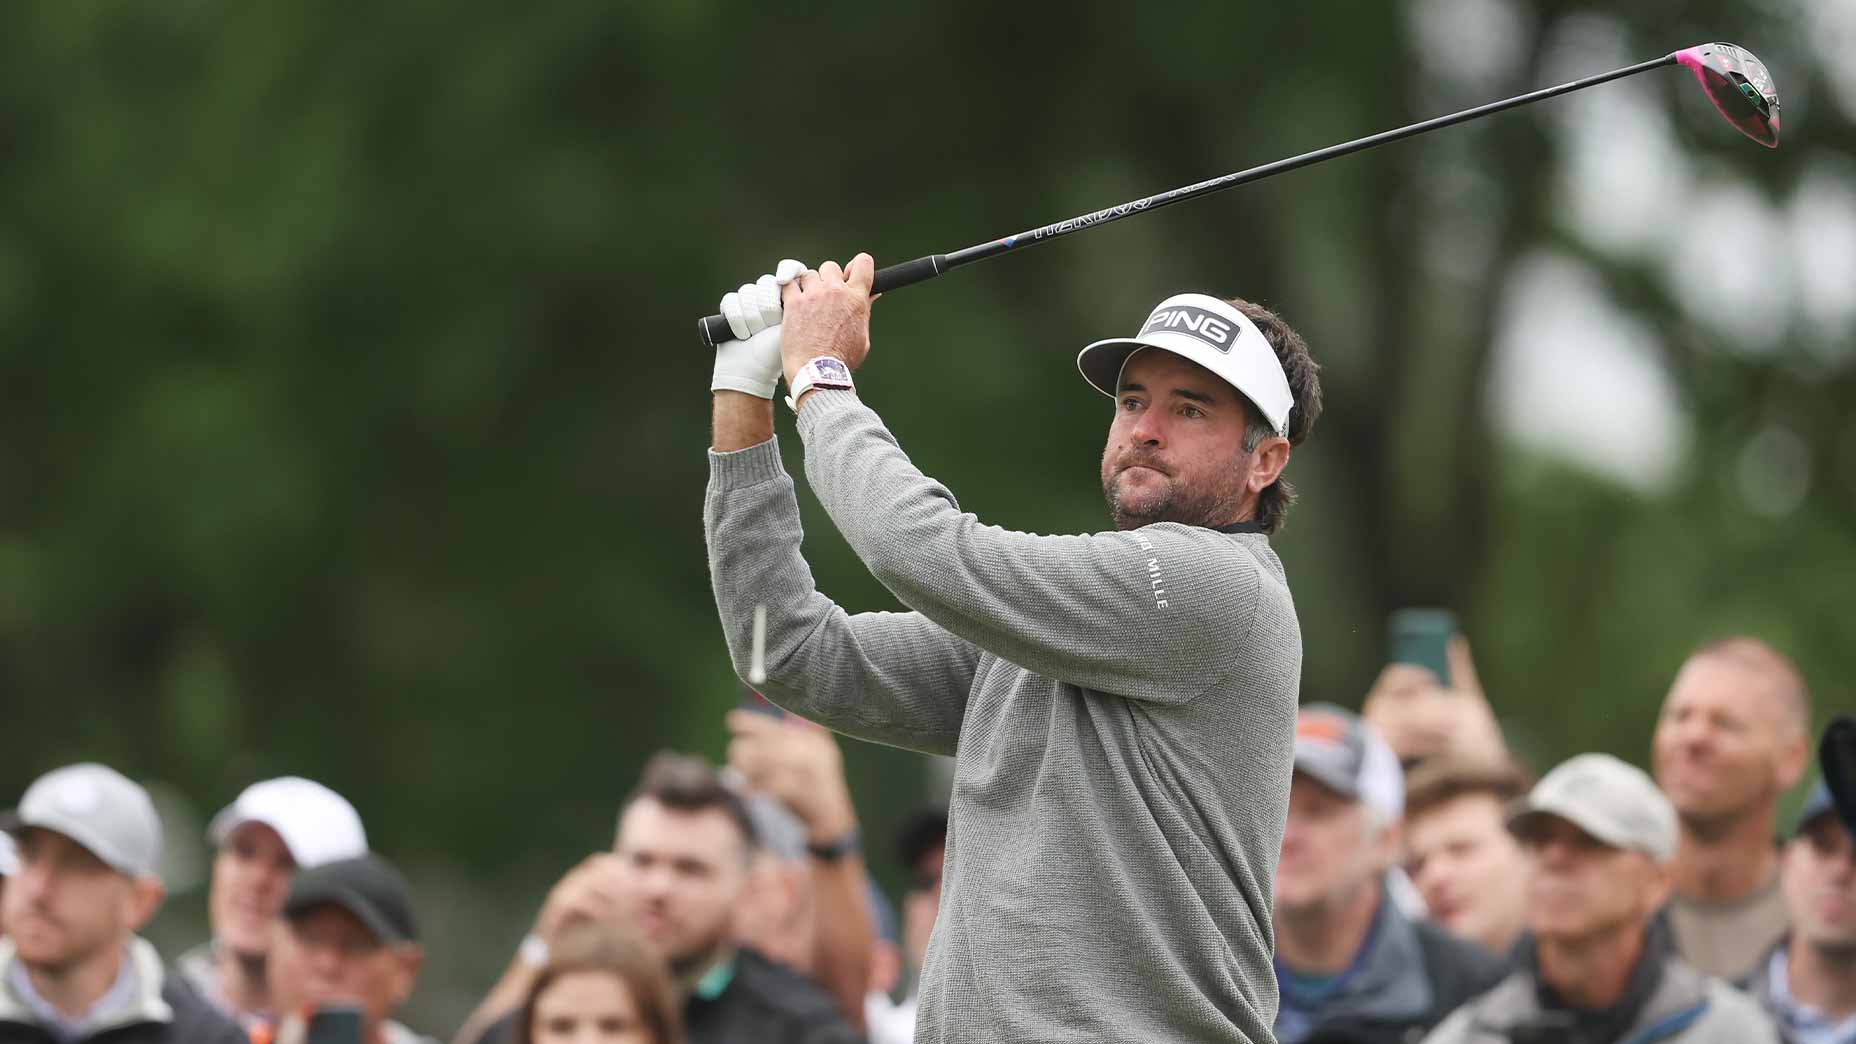 The ridiculous reason Bubba Watson *intentionally* drove into the rough at the PGA Championship